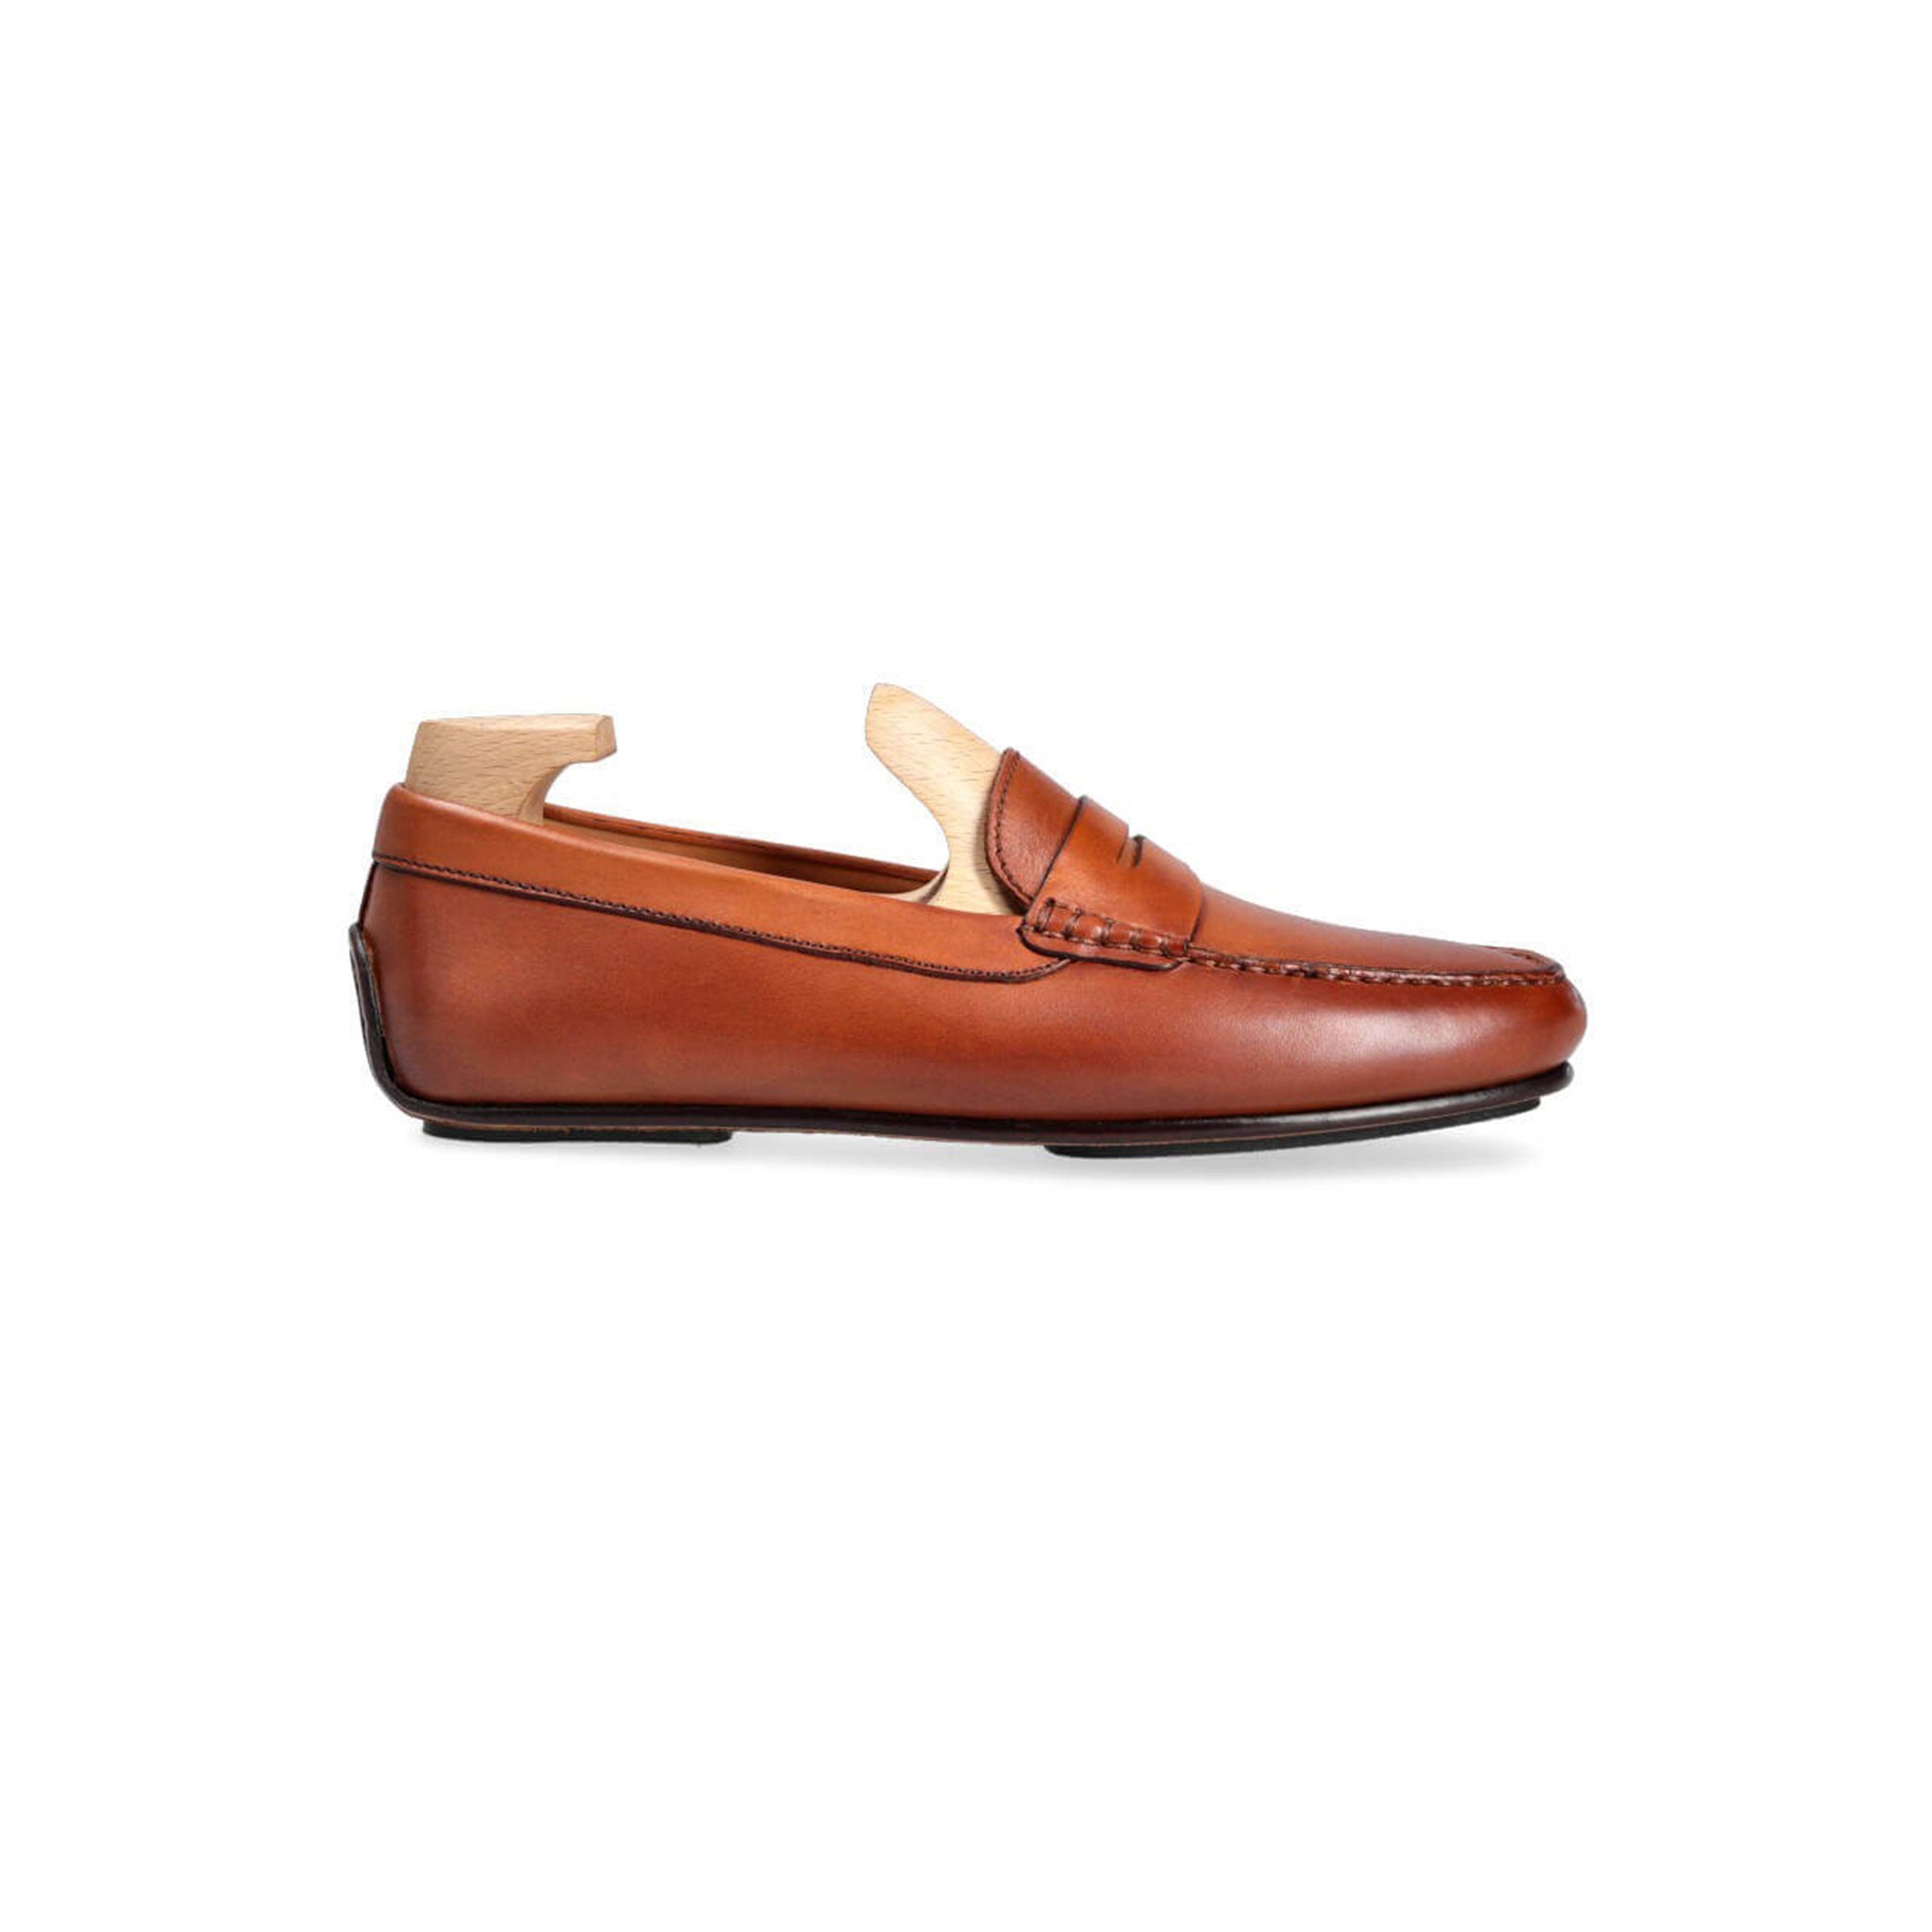 Natural Tan Penny Loafers